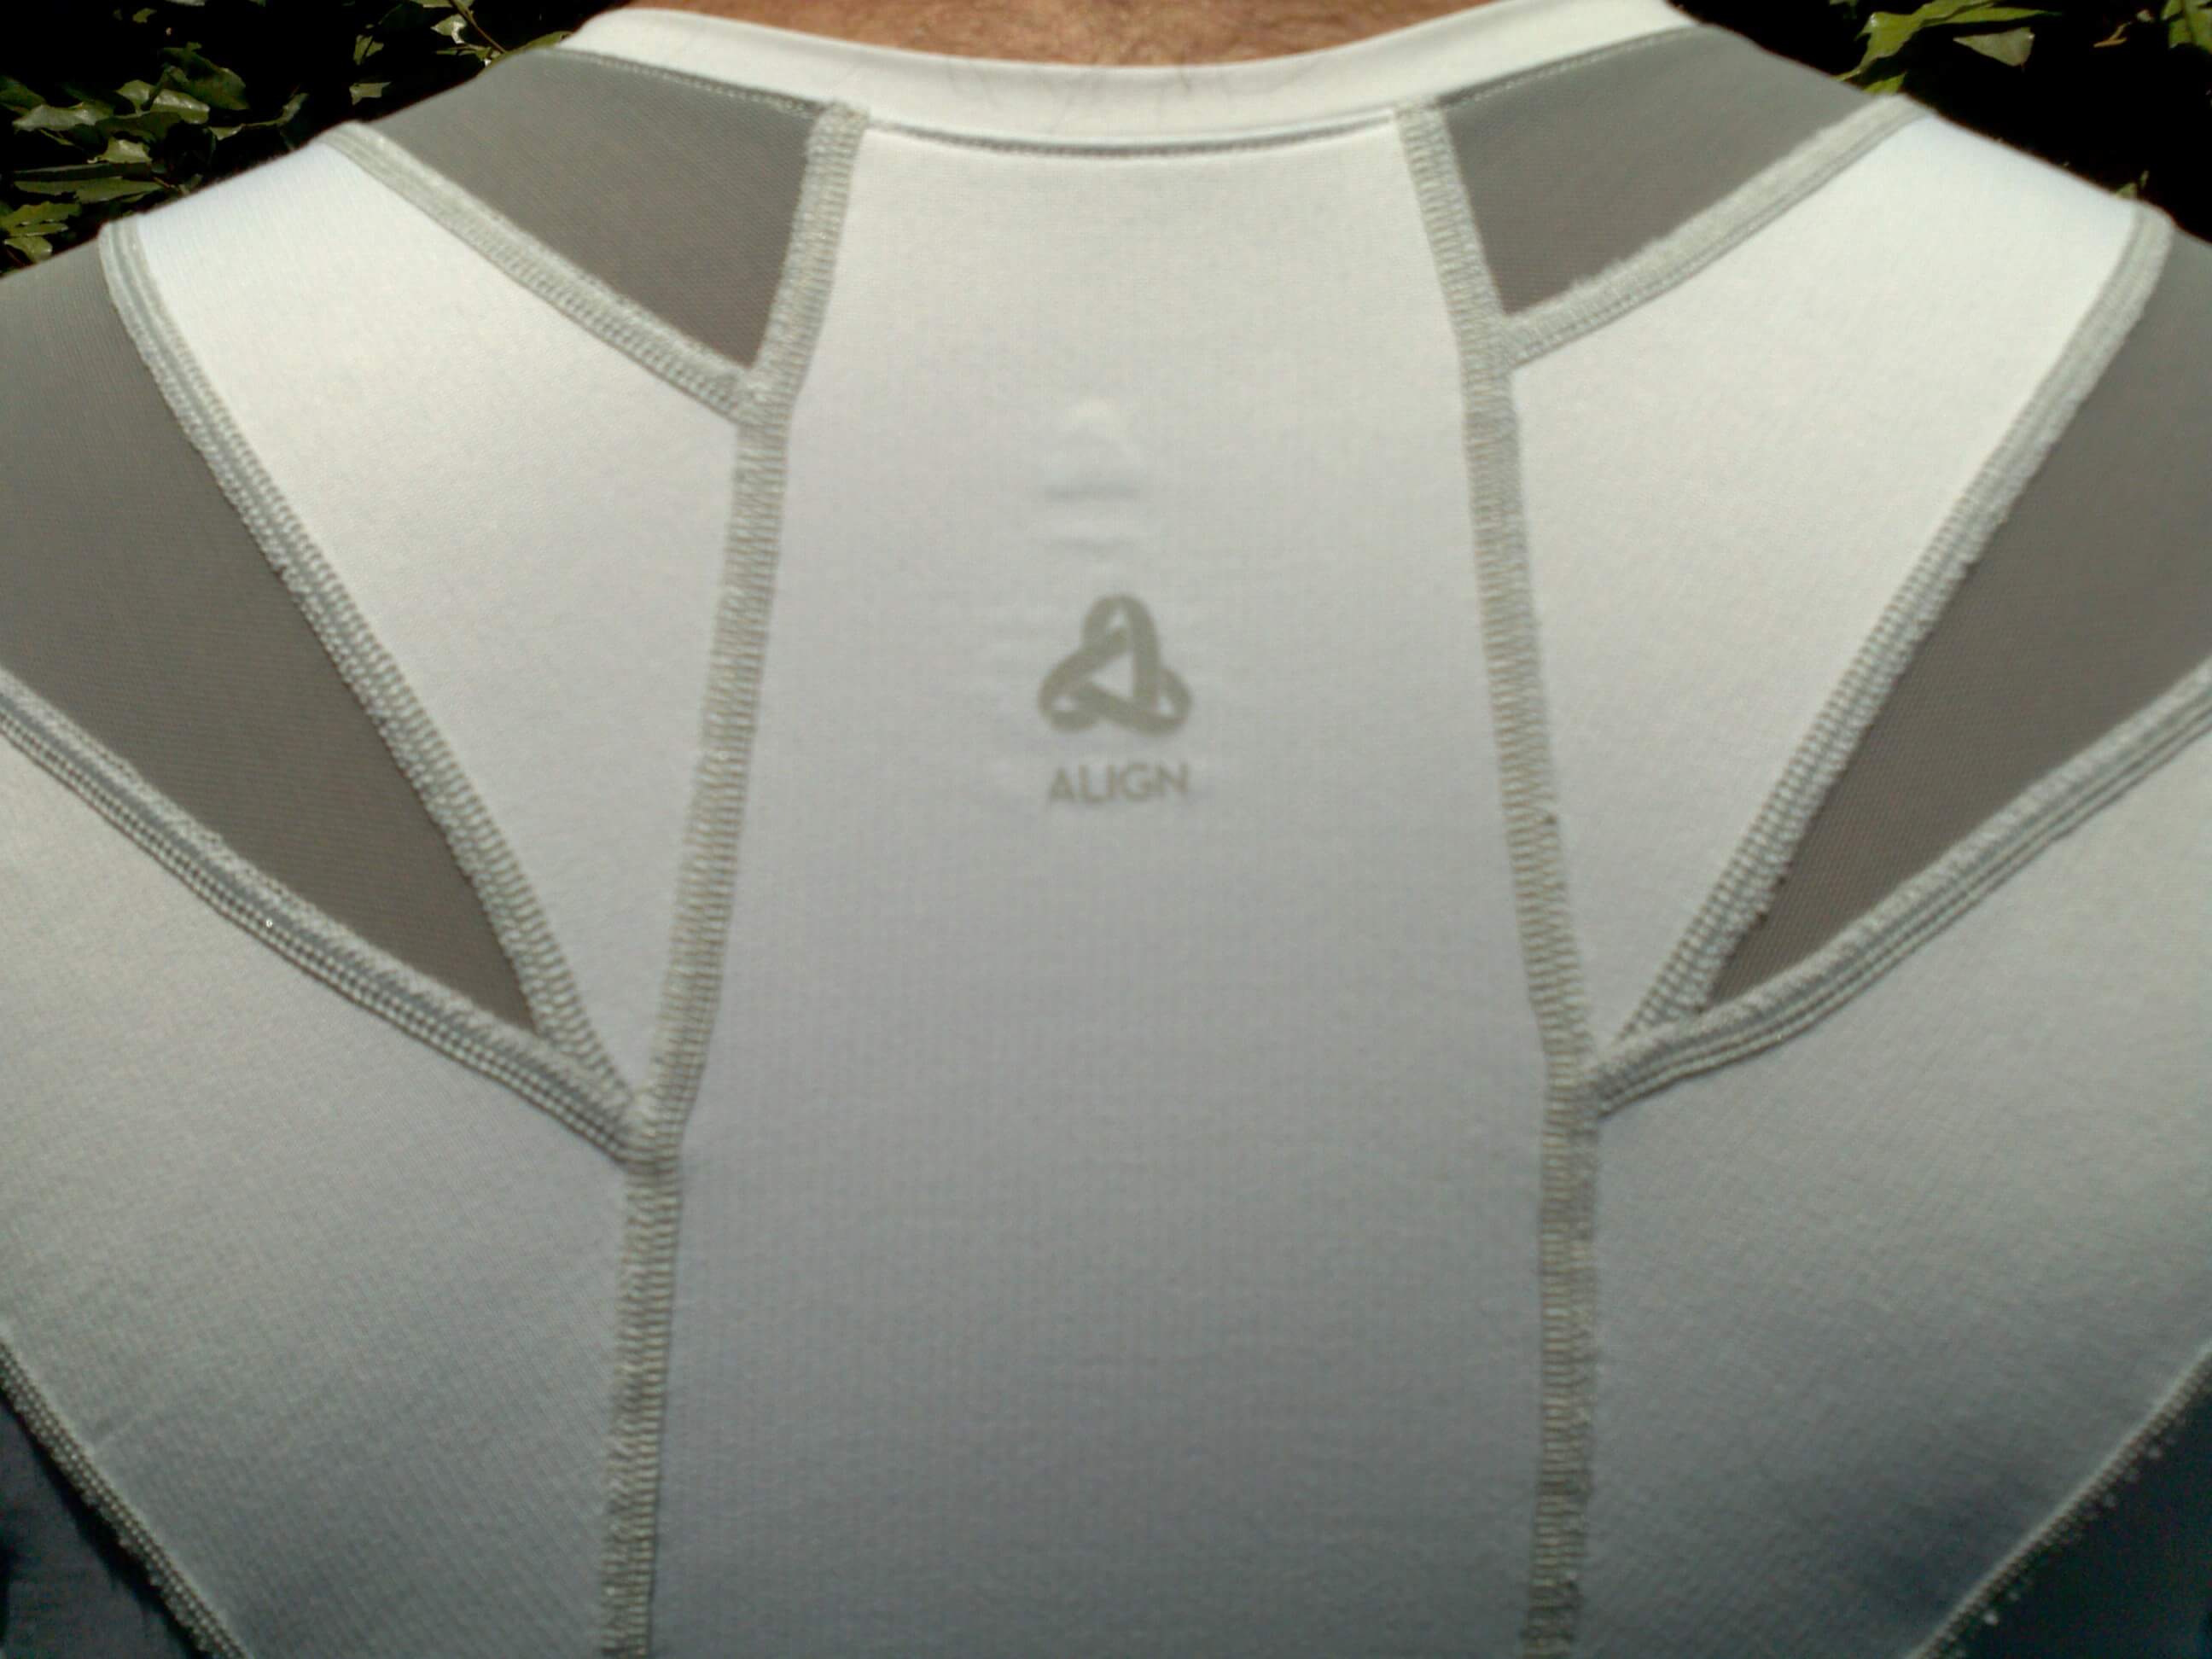 Serious Innovation in Posture Apparel. Alignmed Has Come Along at